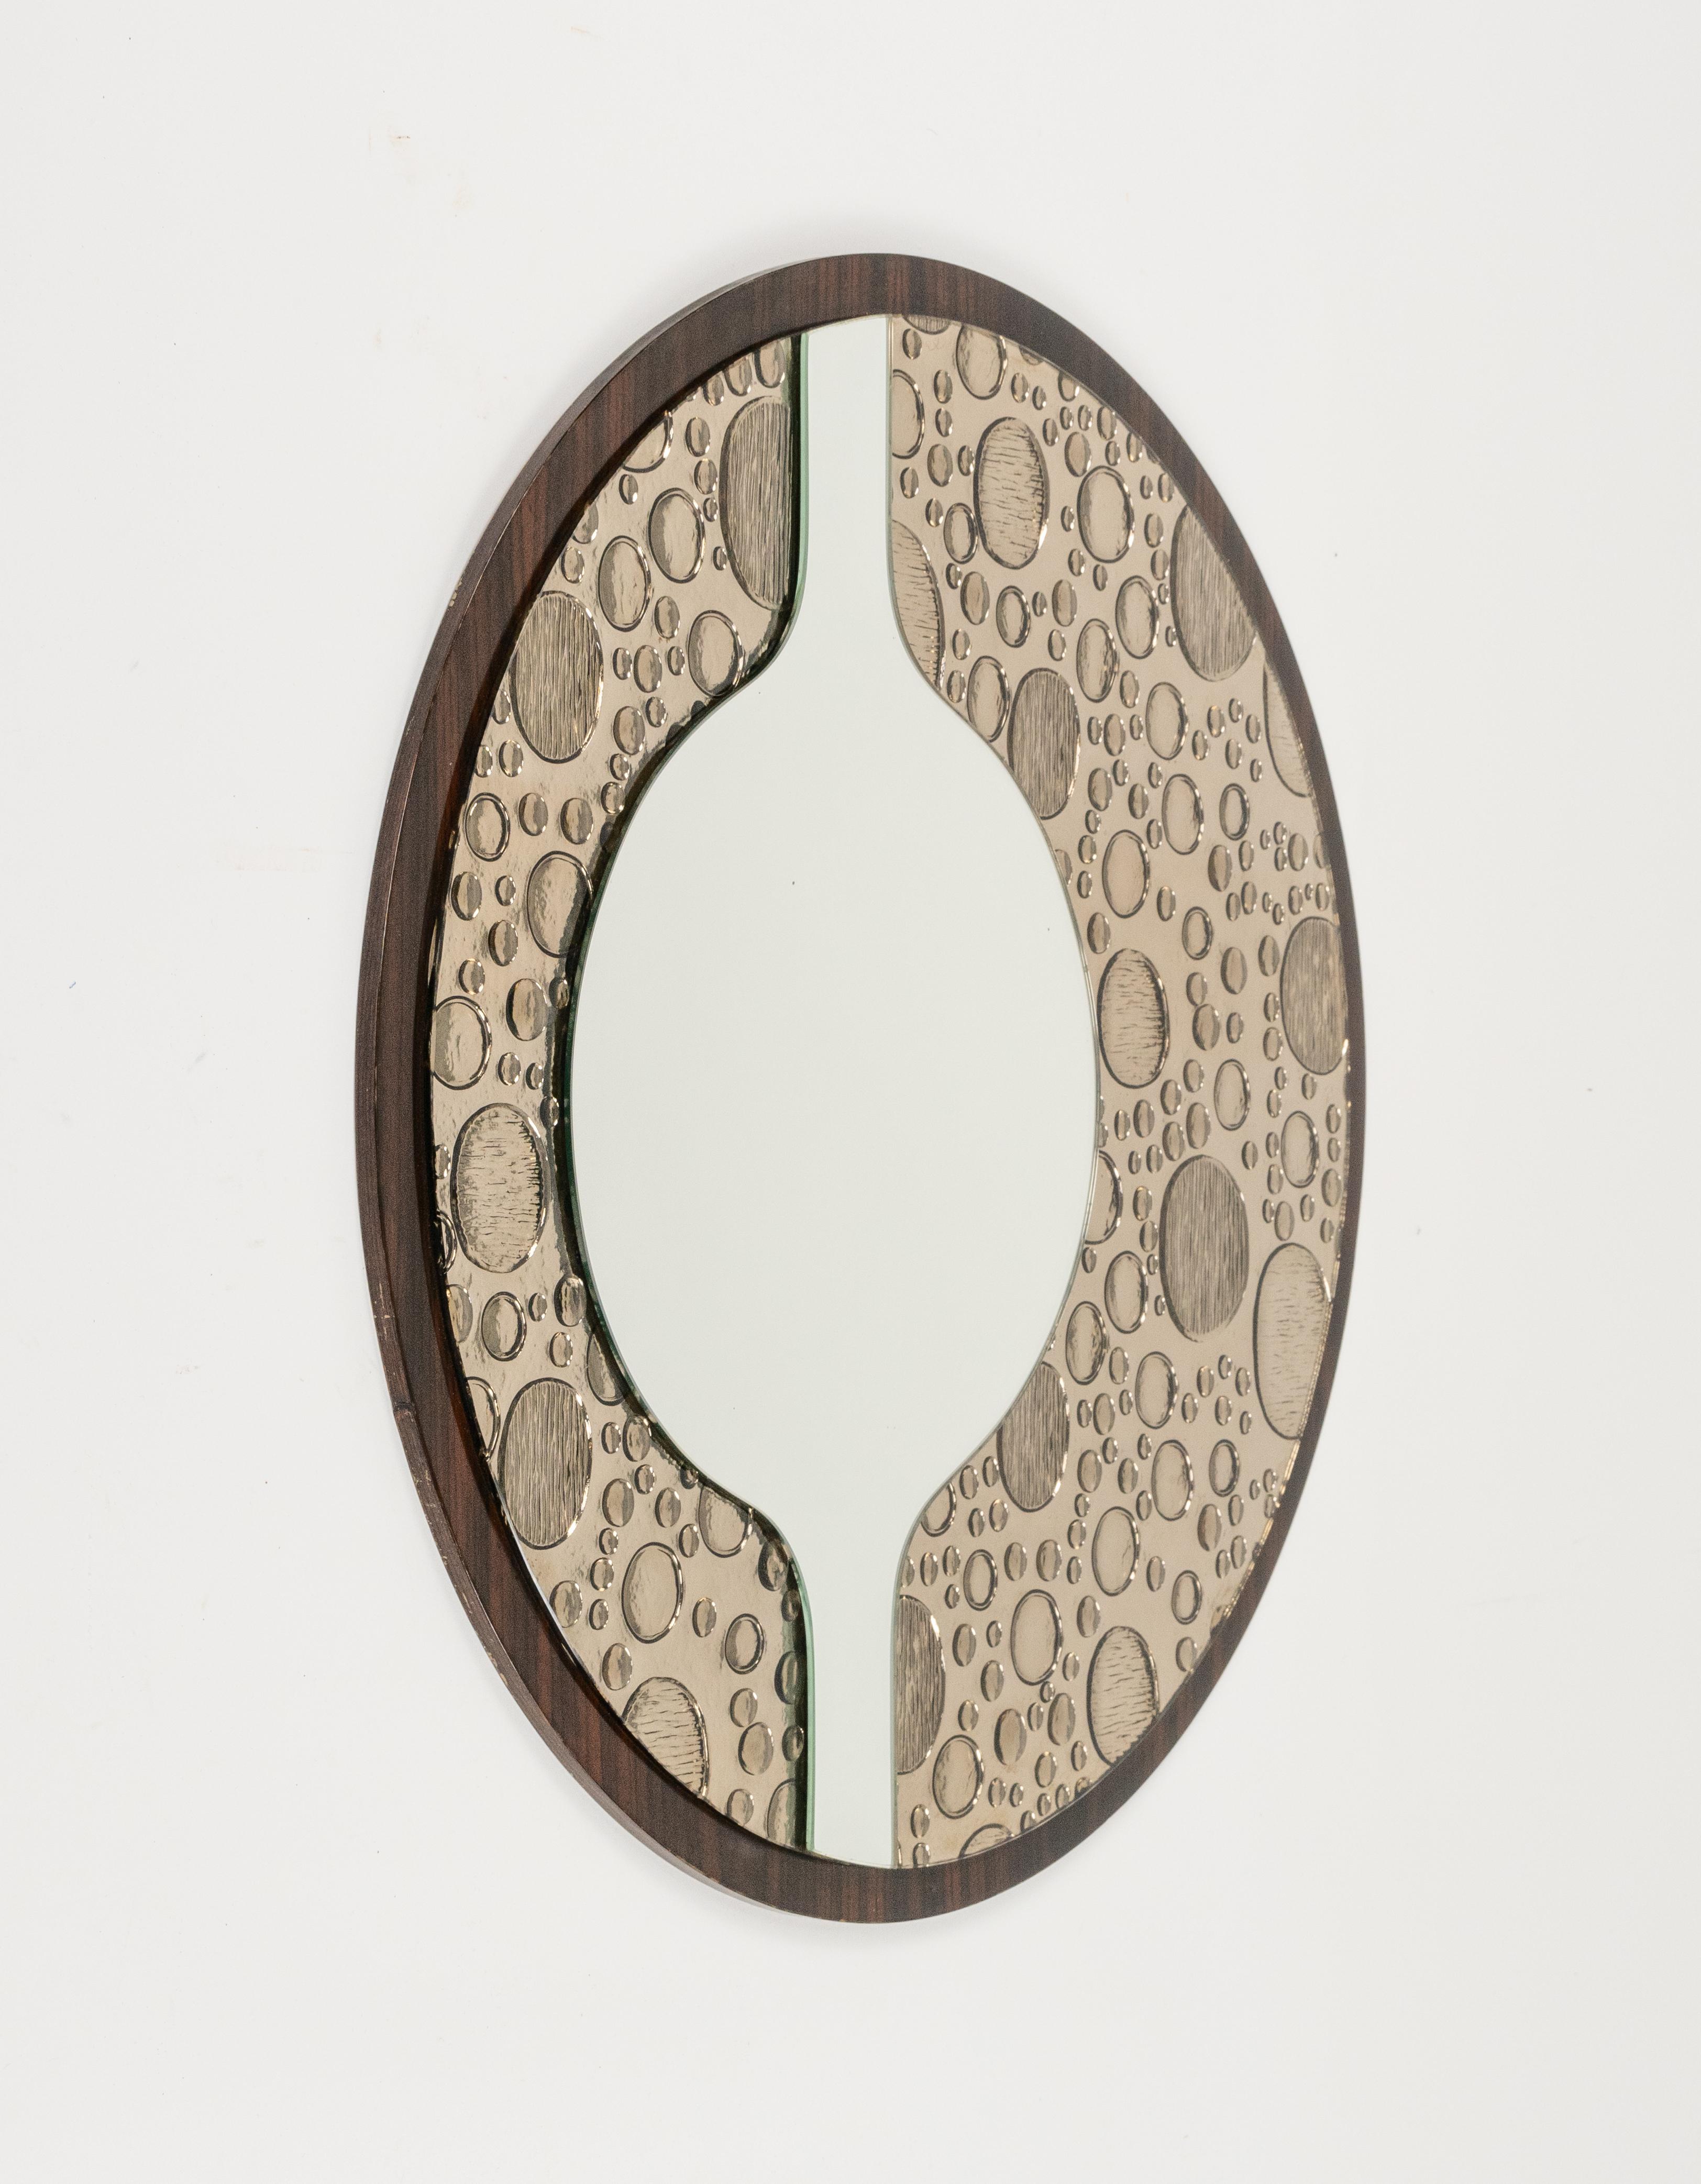 Midcentury amazing round wall mirror in wood and glass decorated with bubble.

Made in Italy in the 1970s.